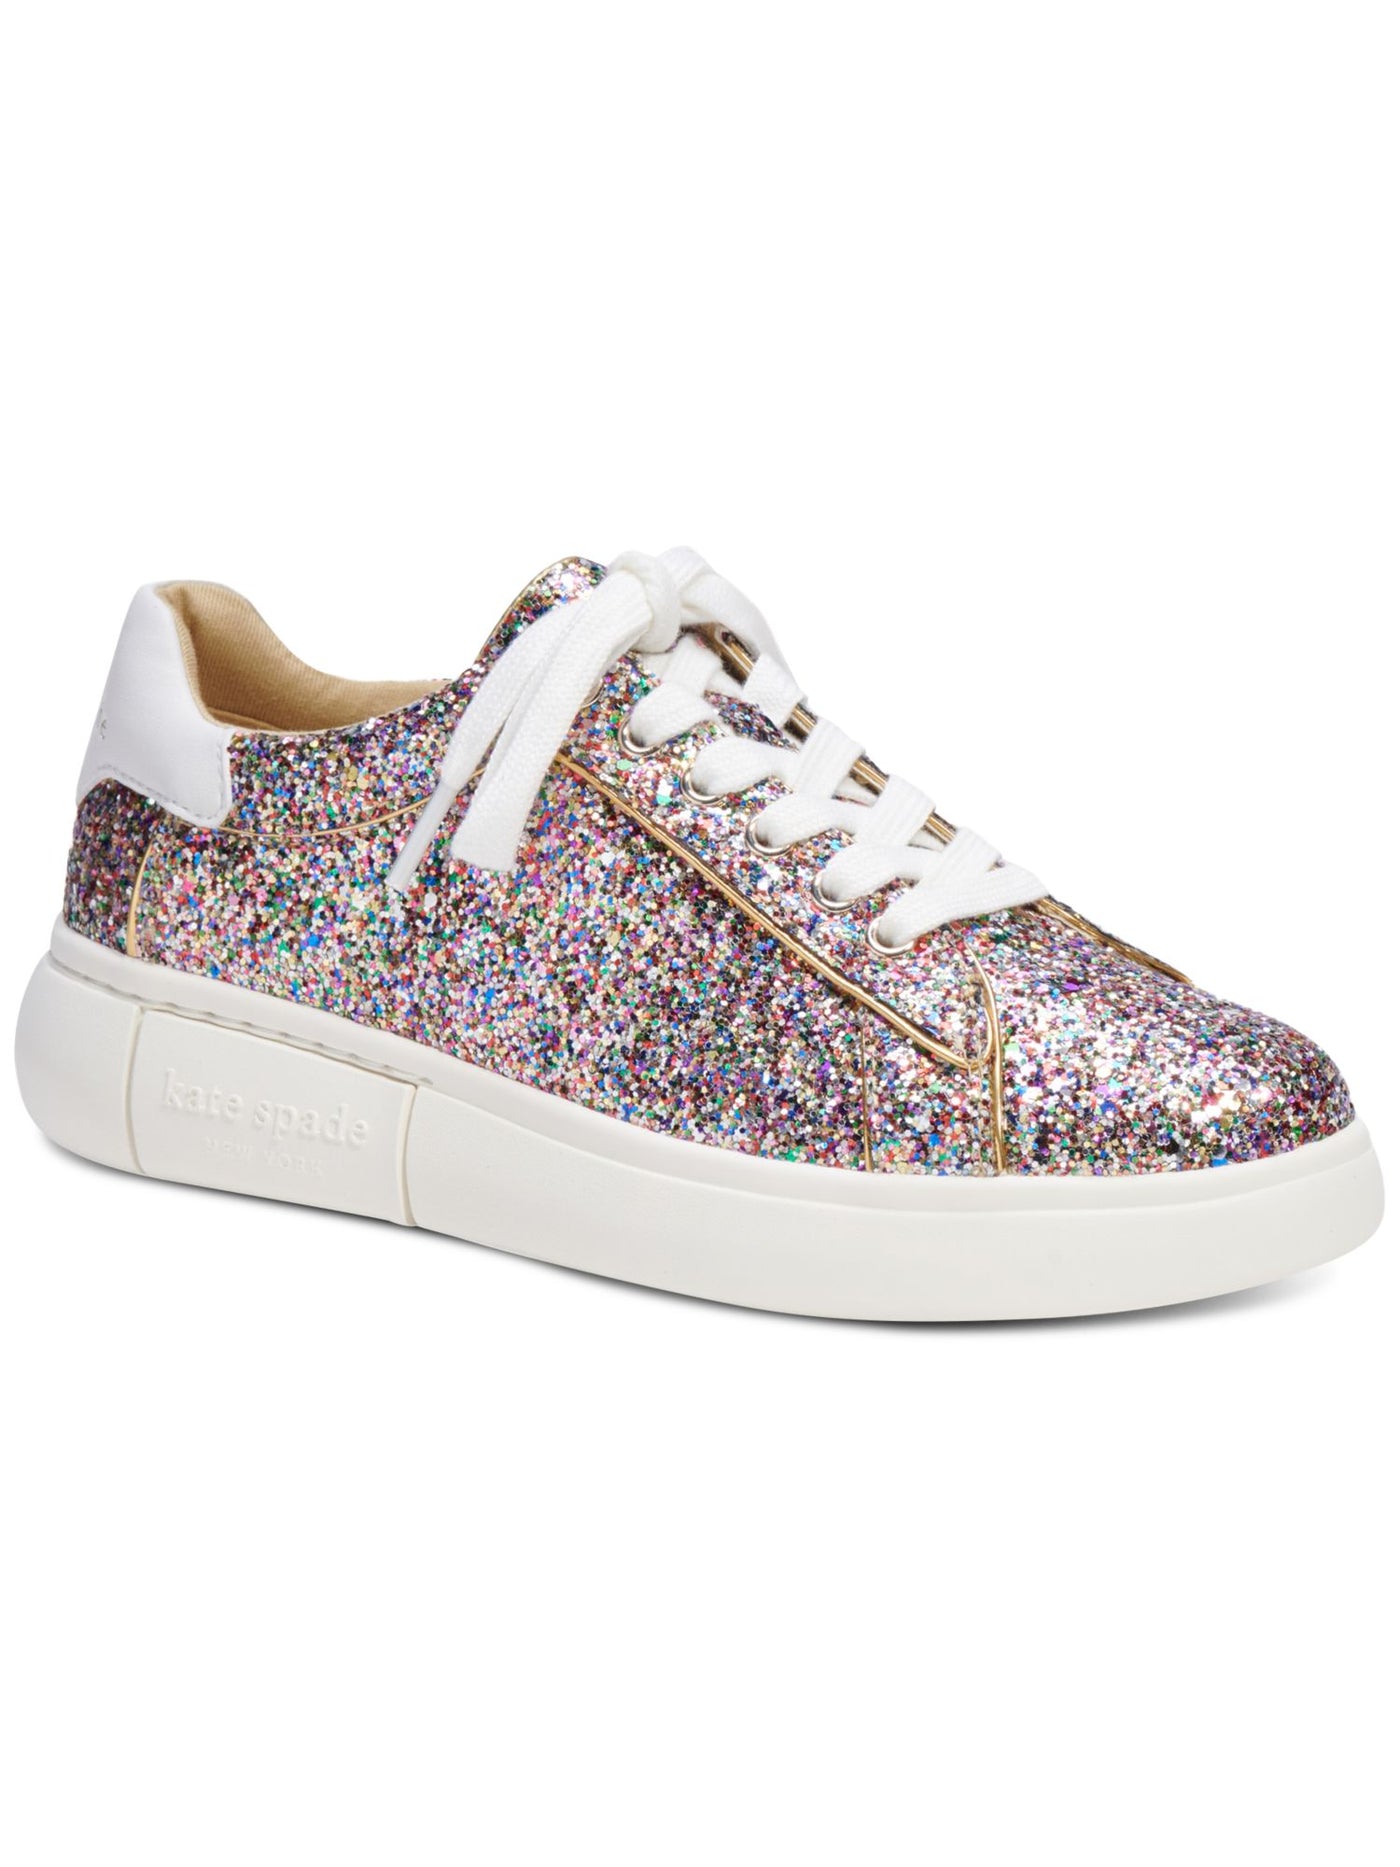 KATE SPADE NEW YORK Womens Silver Cushioned Glitter Lift Round Toe Wedge Lace-Up Athletic Sneakers Shoes 5.5 B